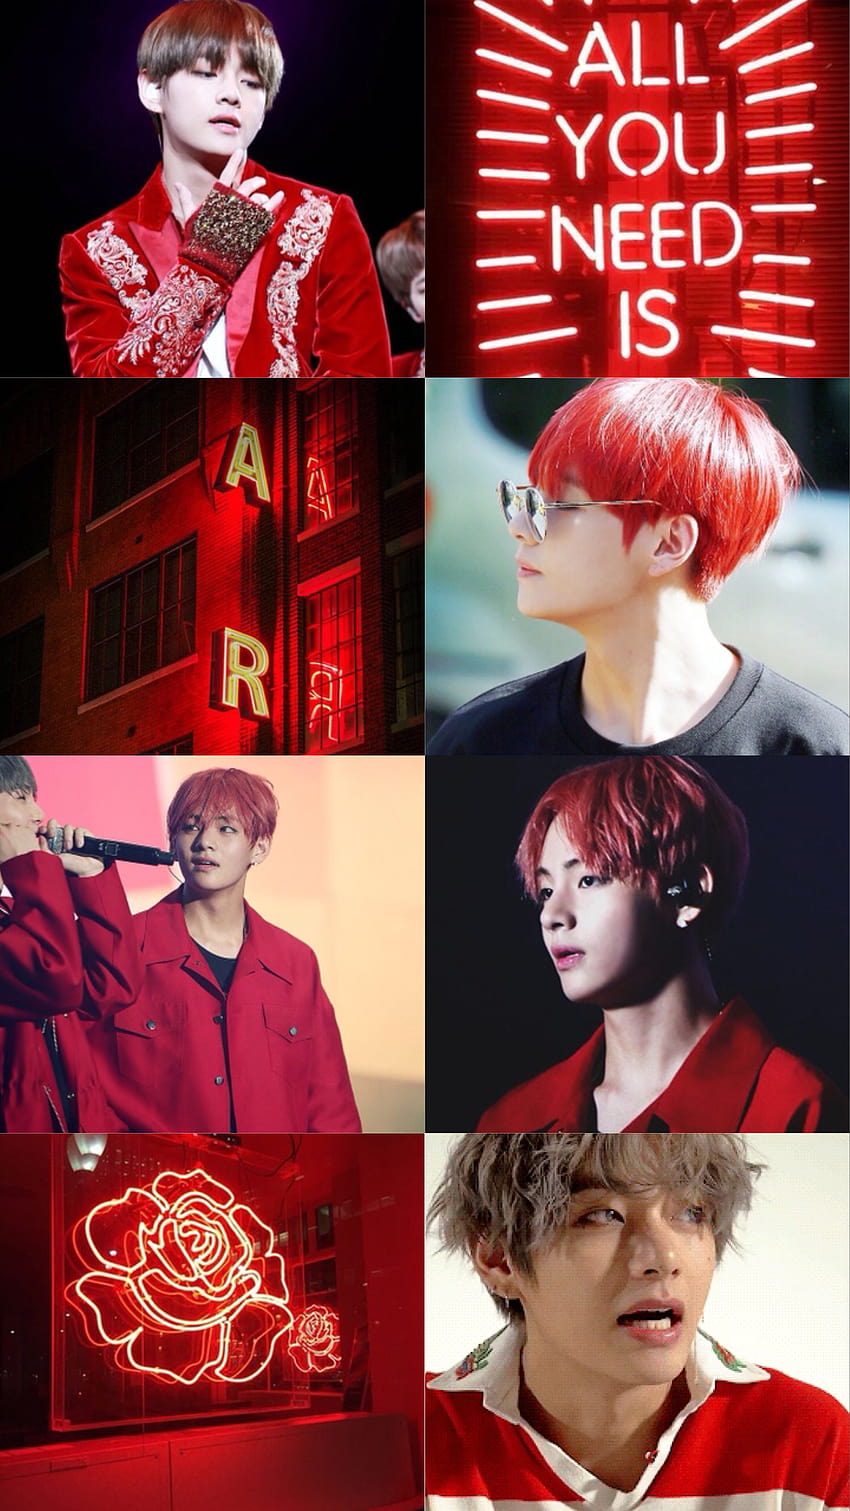 Kim Taehyung with RED HAIR is the... - BTS V - Kim Taehyung | Facebook